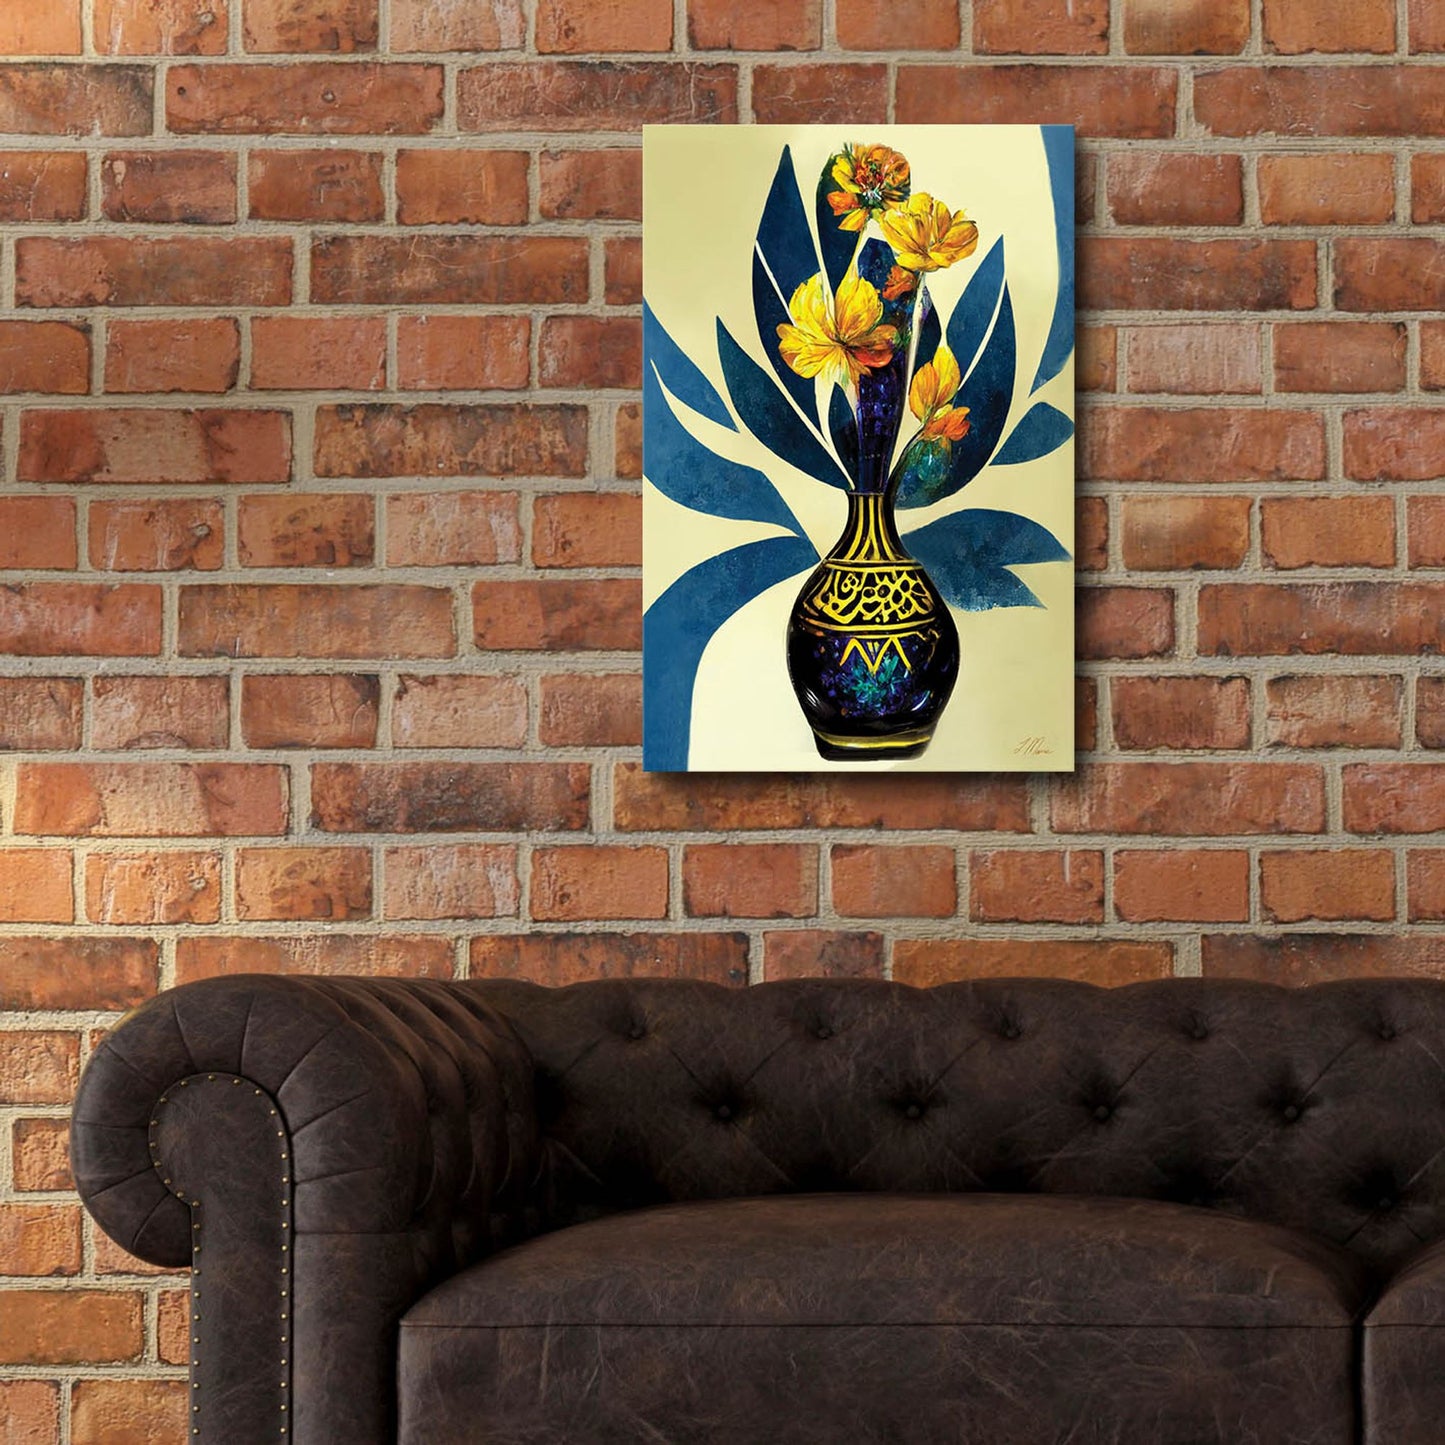 Epic Art 'Golden Vase with Florals' by Tanya Mavric, Acrylic Glass Wall Art,16x24